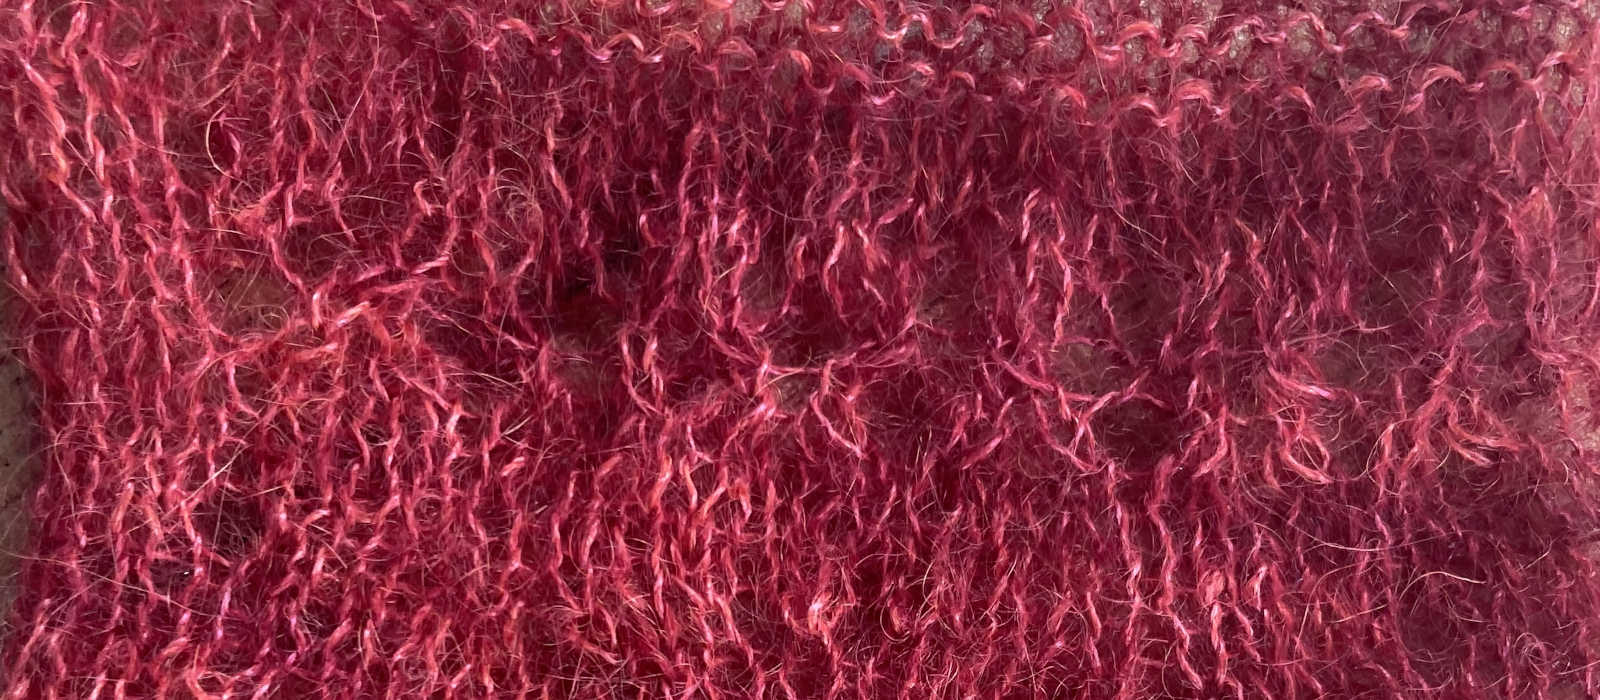 Close-up photo of a yarn swatch made of a fuzzy red yarn.